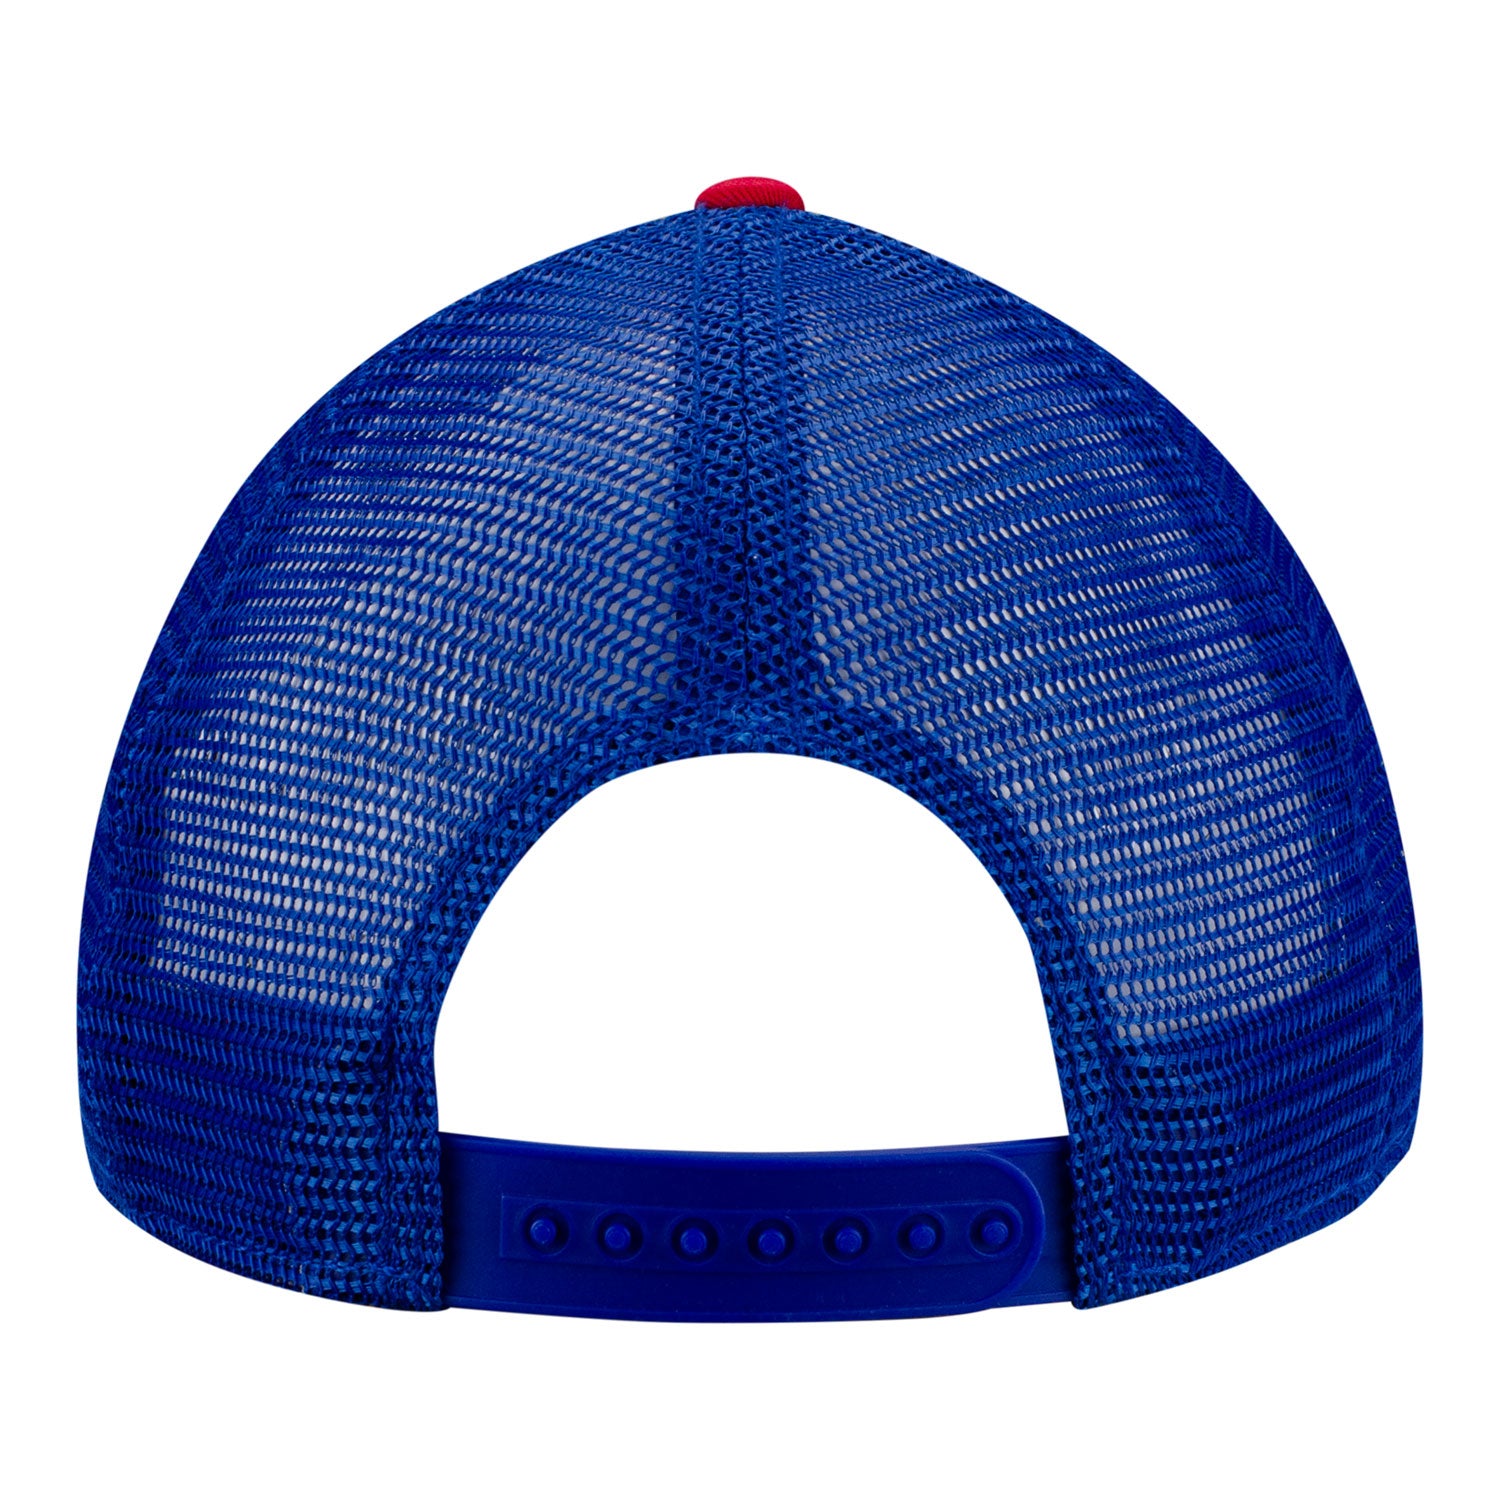 American Needle Rangers Sinclair Hat In Blue, Red & White - Back View